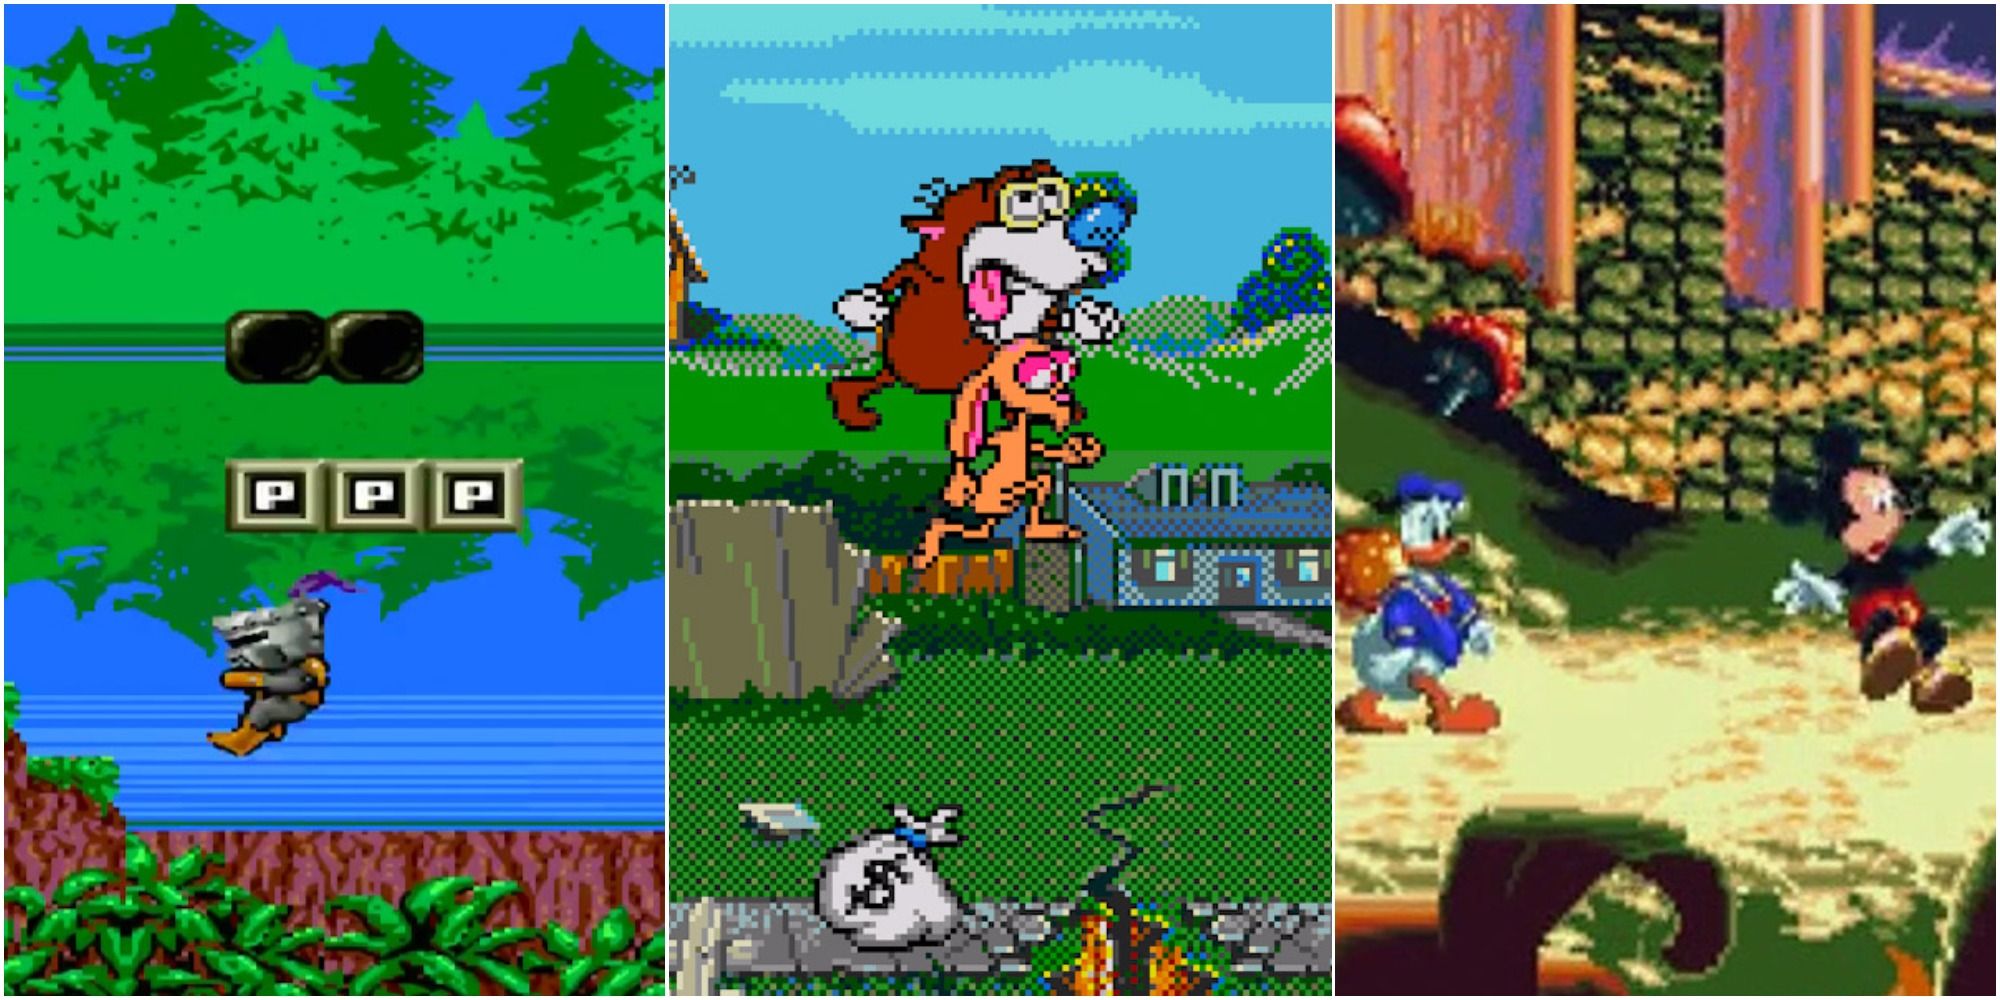 Easiest Sega Genesis Games feature with kid chameleon, ren and stimpy, and world of illusion